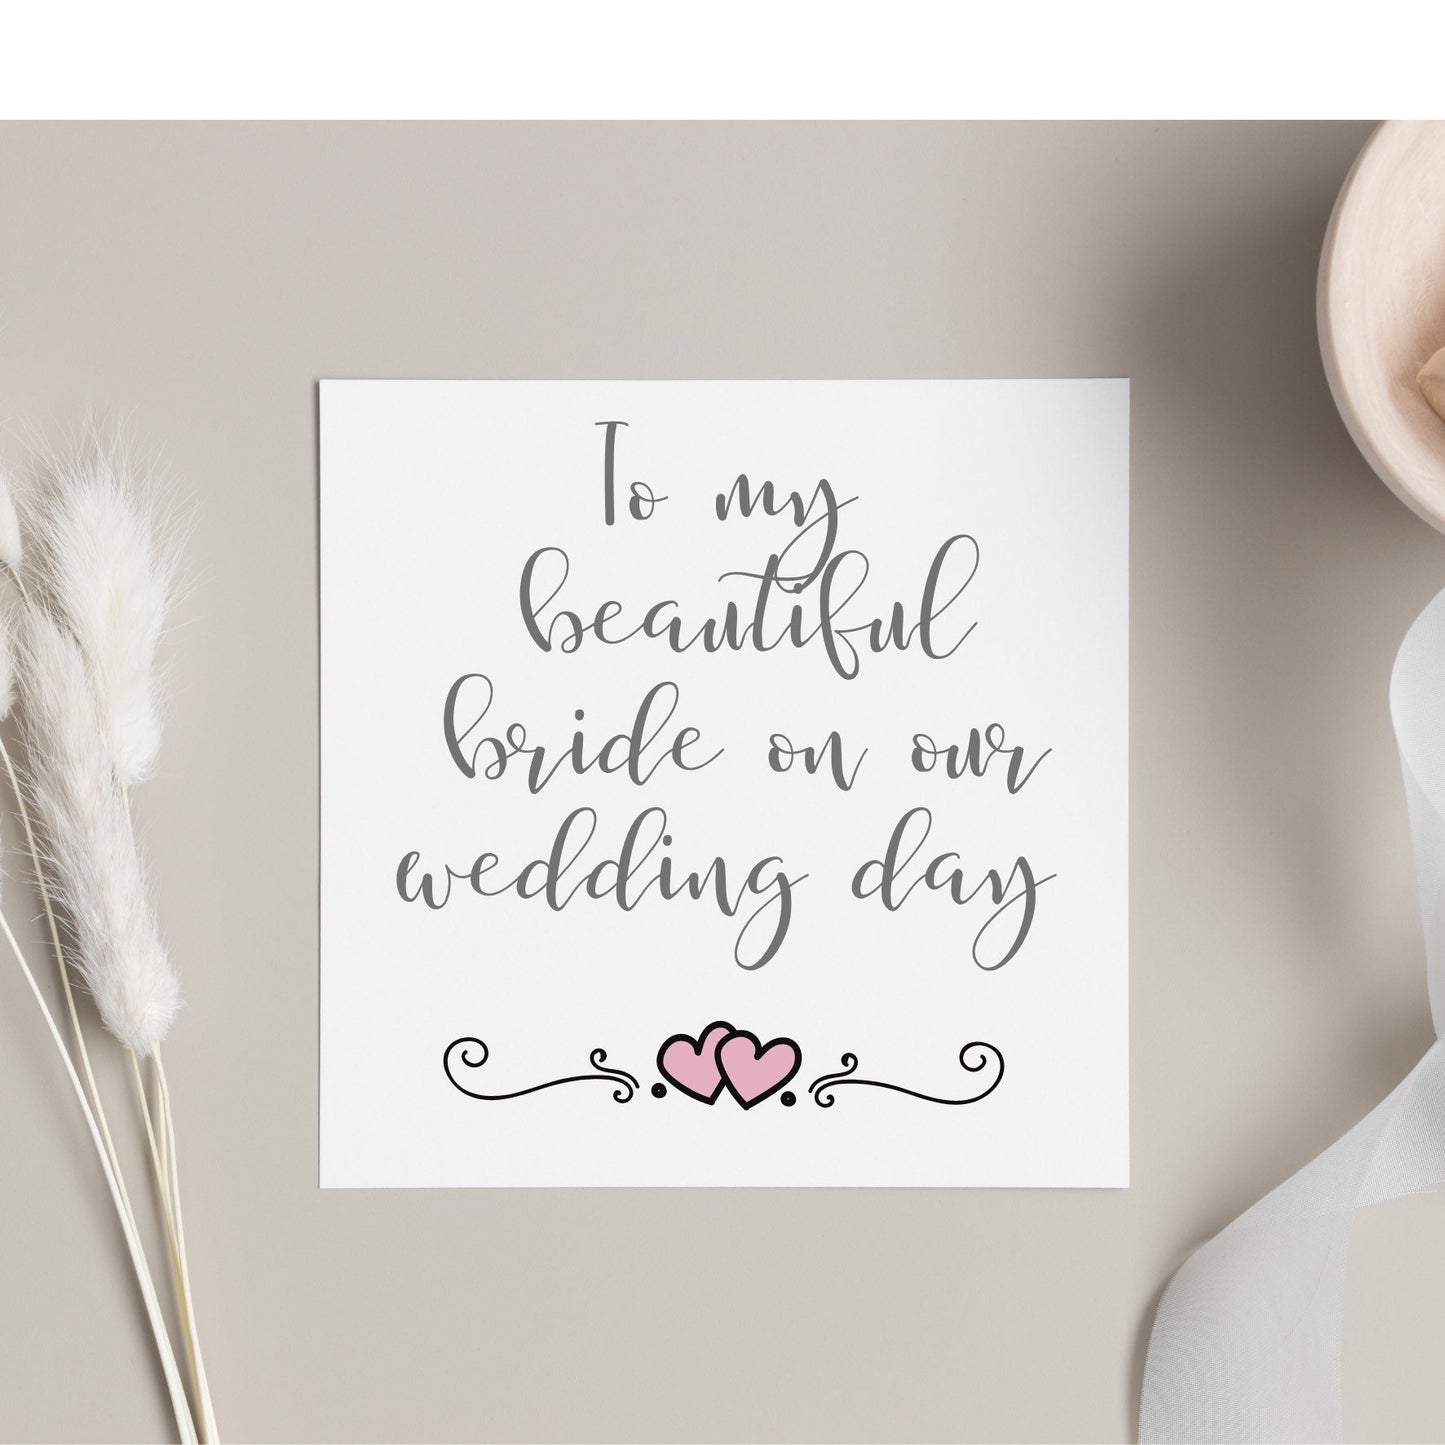 To my bride on our wedding day greeting card, card for future wife, wedding morning card for bride, bride to be gifts from groom